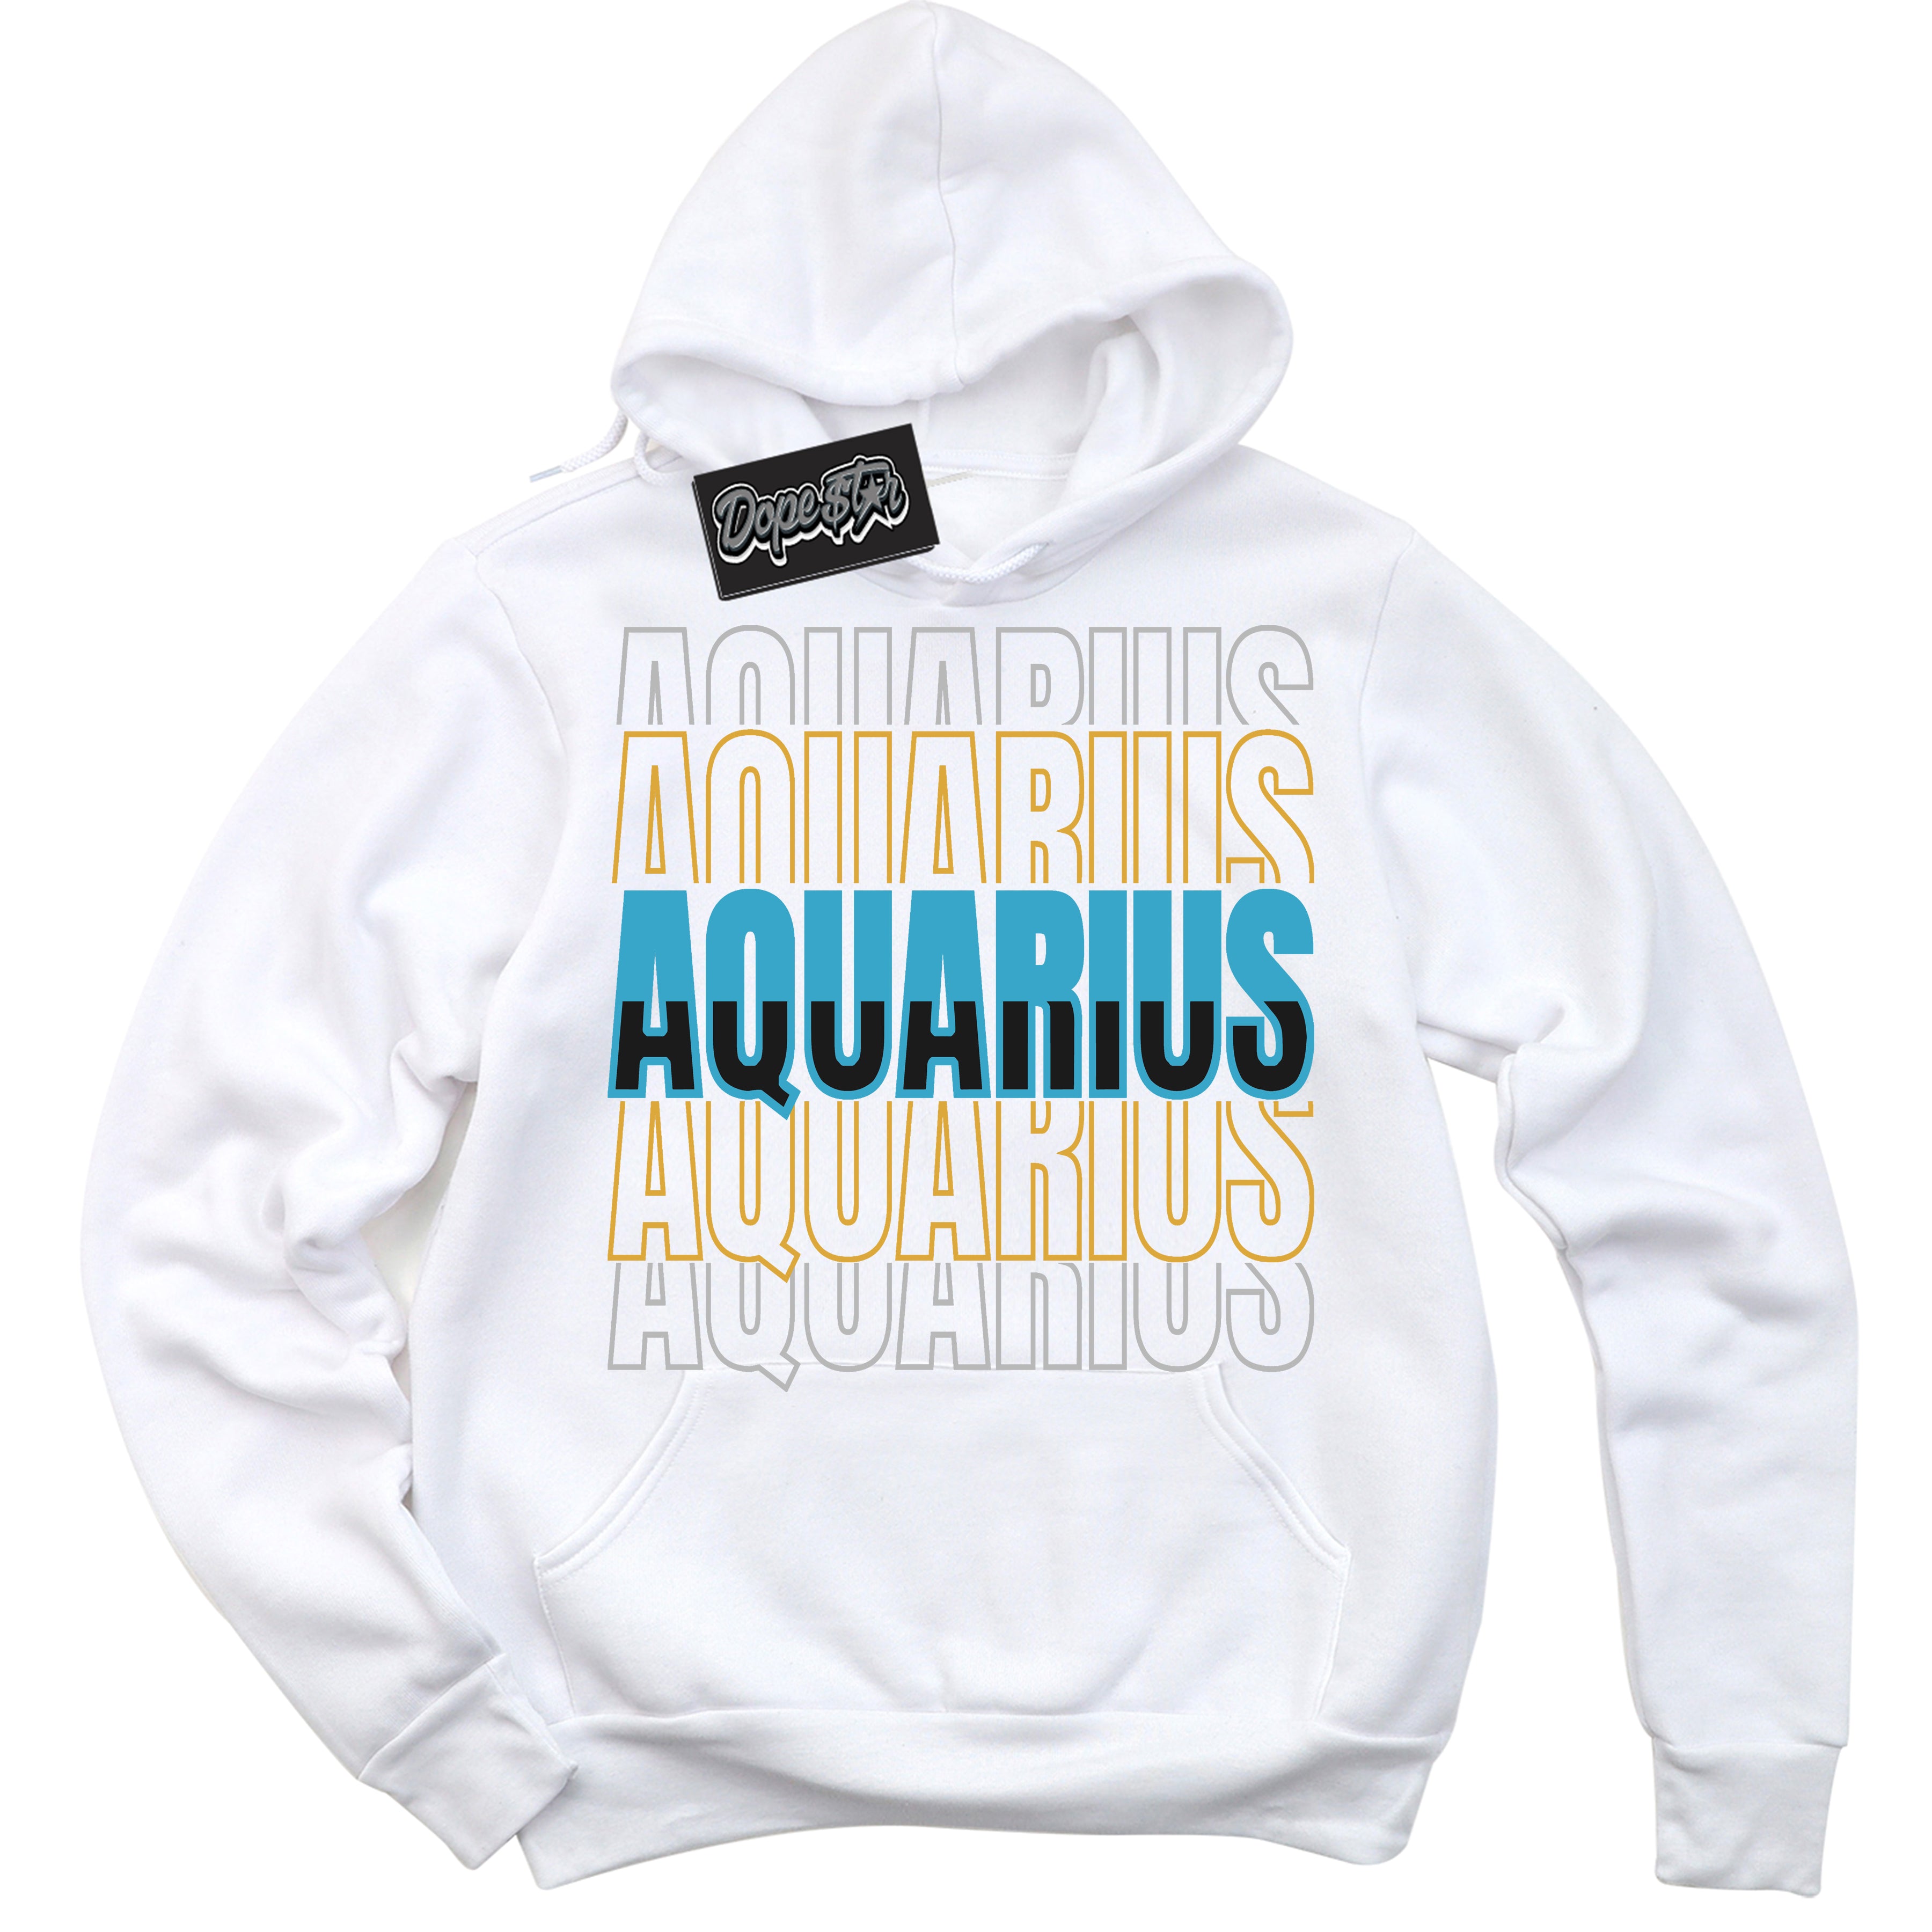 Cool White Hoodie with “ Aquarius ”  design that Perfectly Matches Aqua 5s Sneakers.